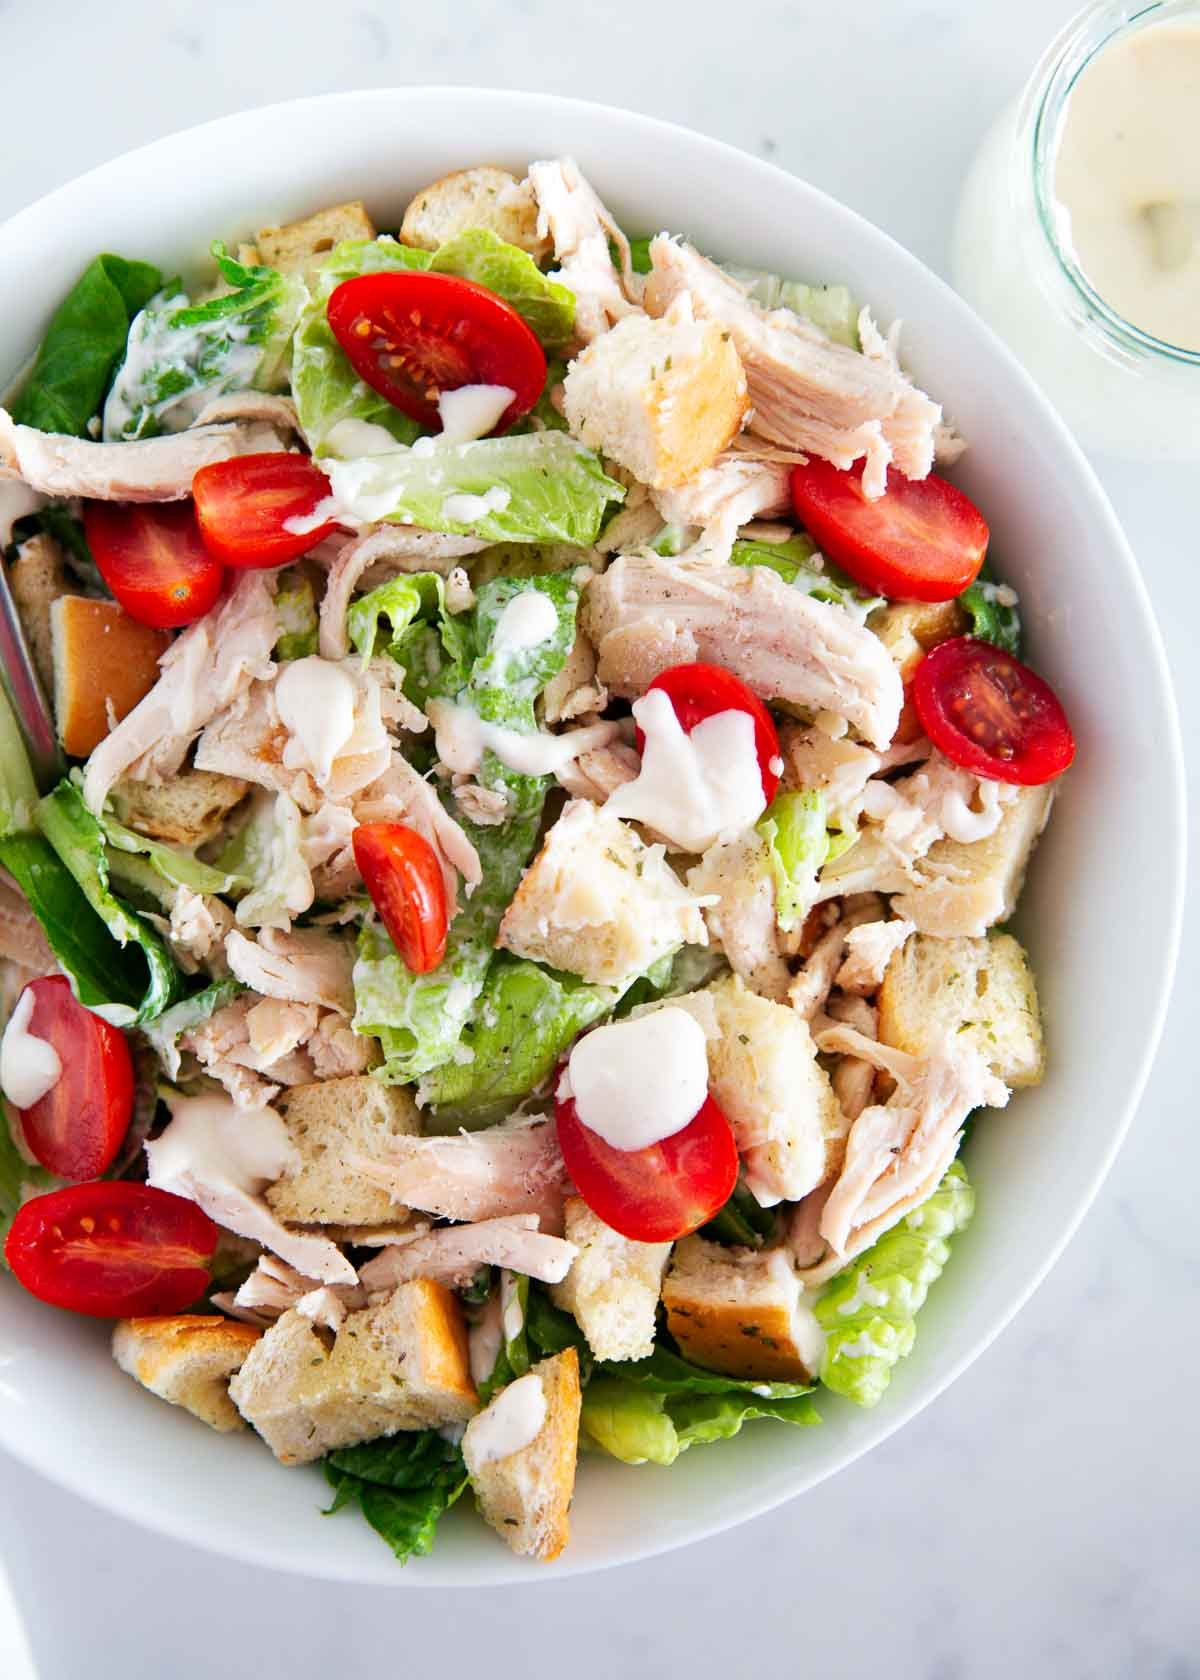 Caesar salad with chicken and tomatoes in a bowl.